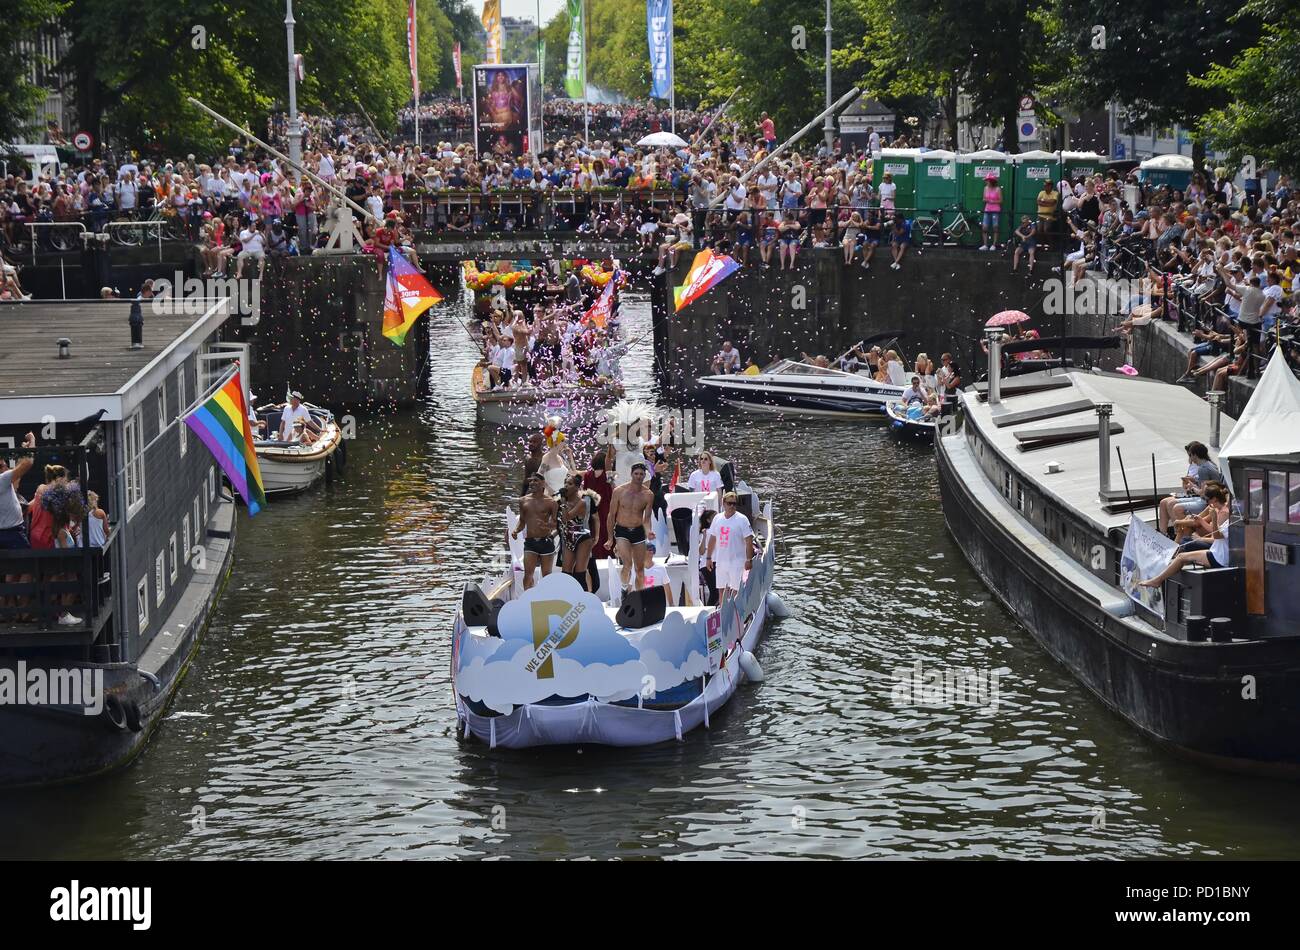 Amsterdam, Netherlands - August 4, 2018: The lead boat (number 0) carrying the theme slogen, 'We Can Be Heroes' at the time of the Pride boat parade Credit: Adam Szuly Photography/Alamy Live News Stock Photo